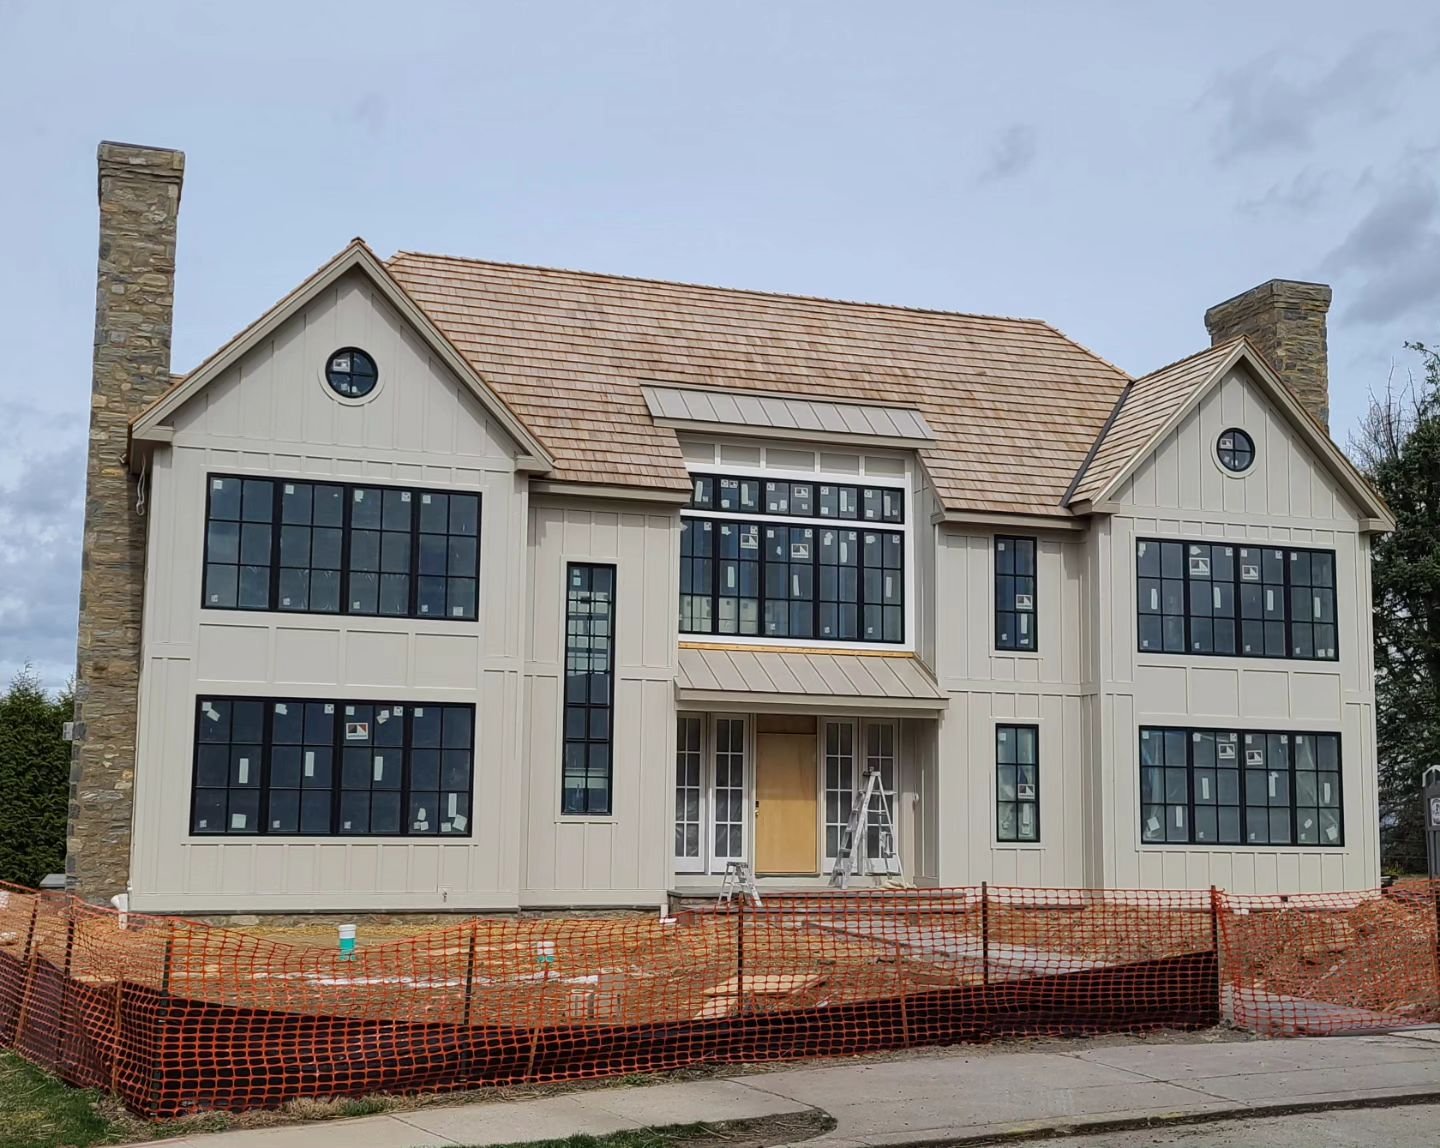 Construction is moving along on our custom home in Chestnut Hill. It's exciting to see drywall installed and the interior spaces beginning to be defined.

@blakedevelopment 
@mulhernkulp 

#cunnarch # customhome #newbuild #sitevisit #constructionupda